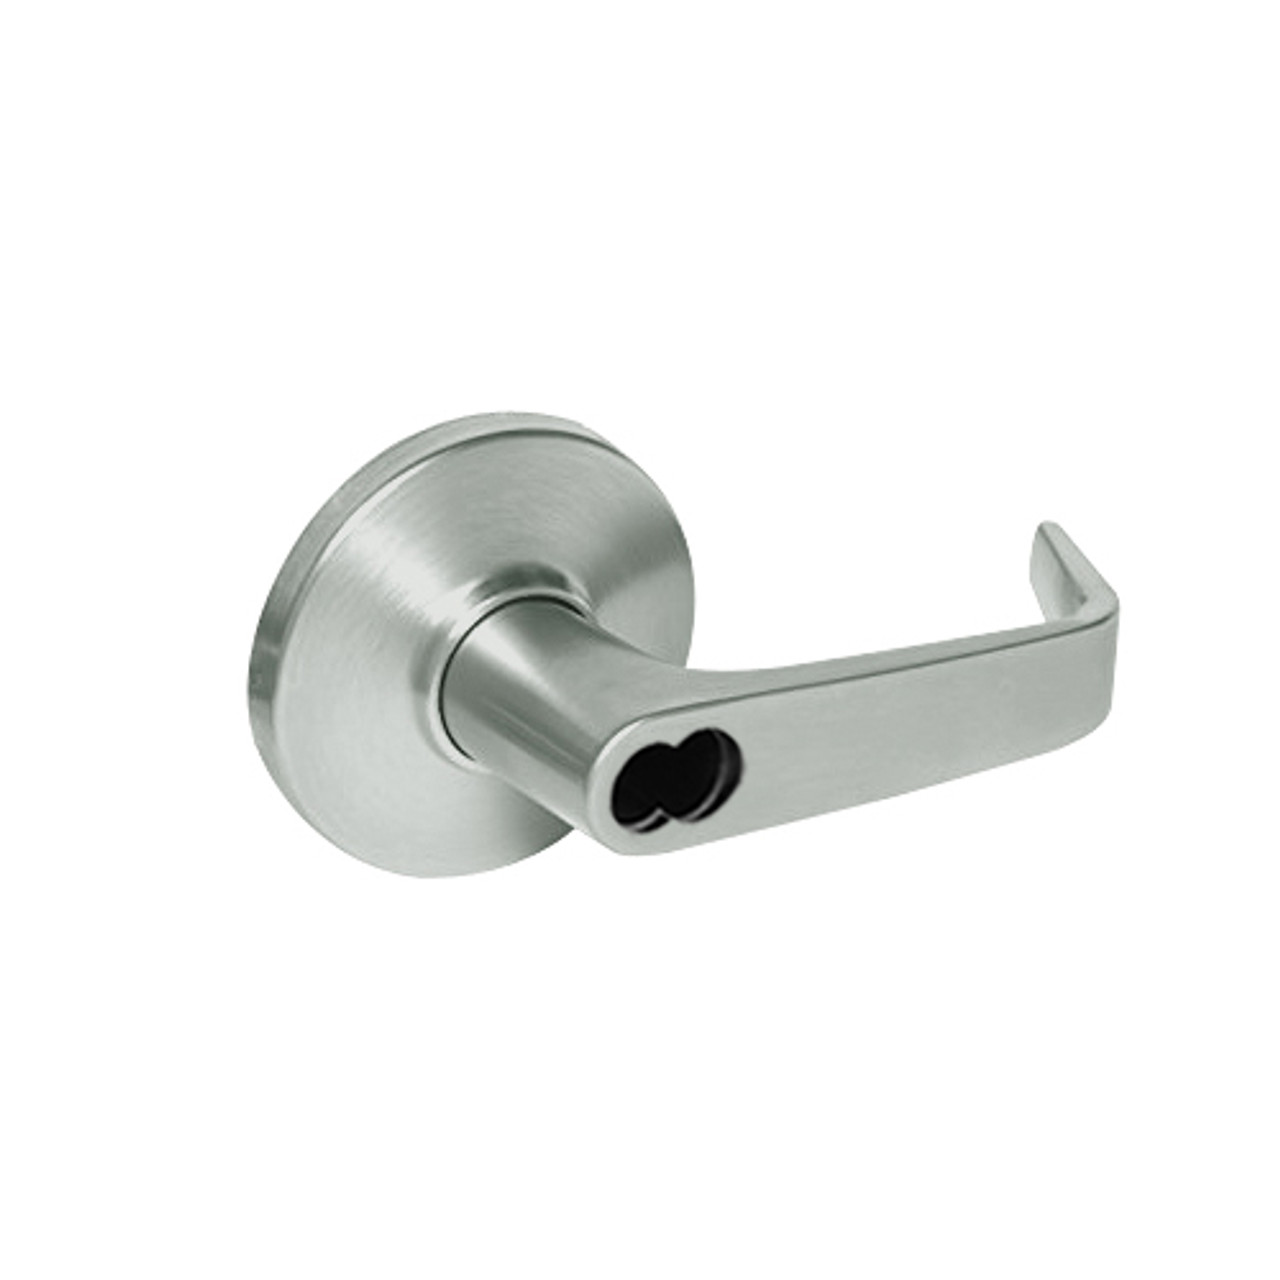 9K37XD15DSTK618 Best 9K Series Special Function Cylindrical Lever Locks with Contour Angle with Return Lever Design Accept 7 Pin Best Core in Bright Nickel